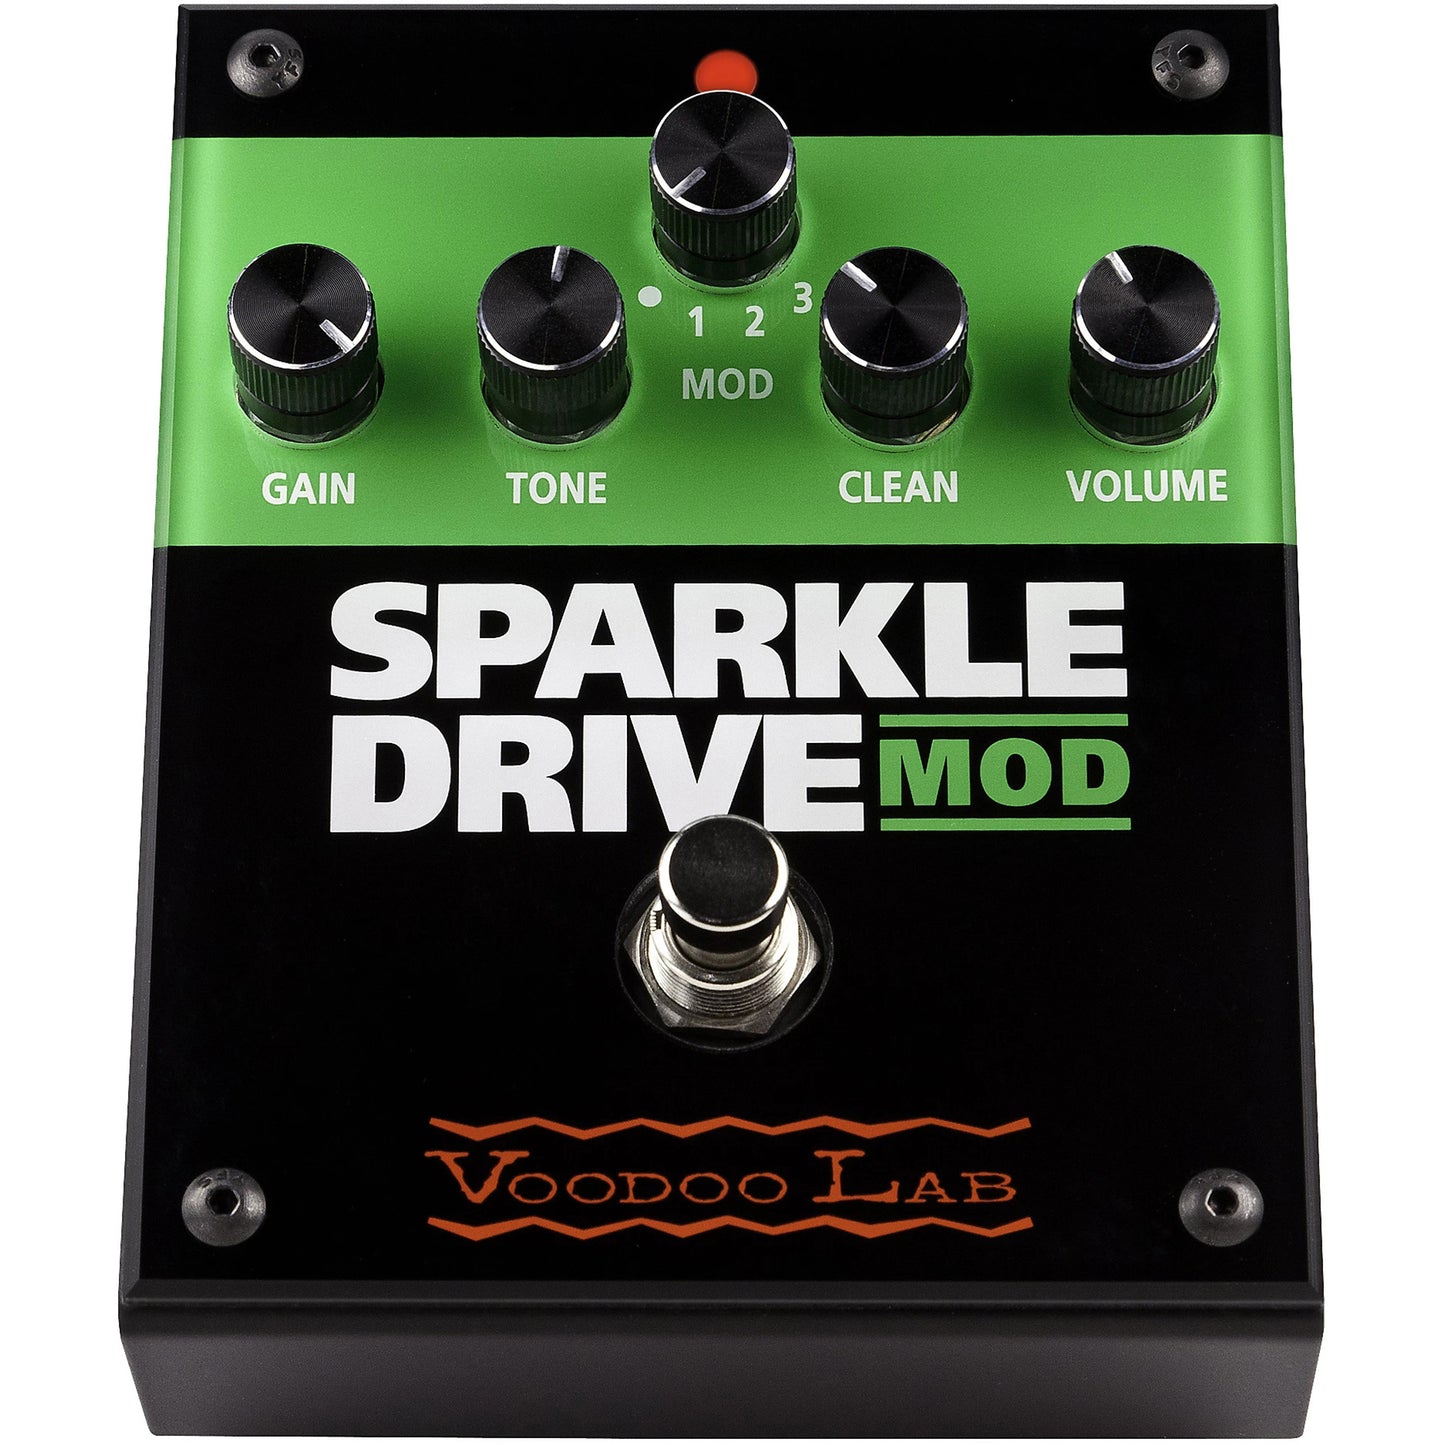 Voodoo Lab Sparkle Drive MOD Overdrive Guitar Effects Pedal